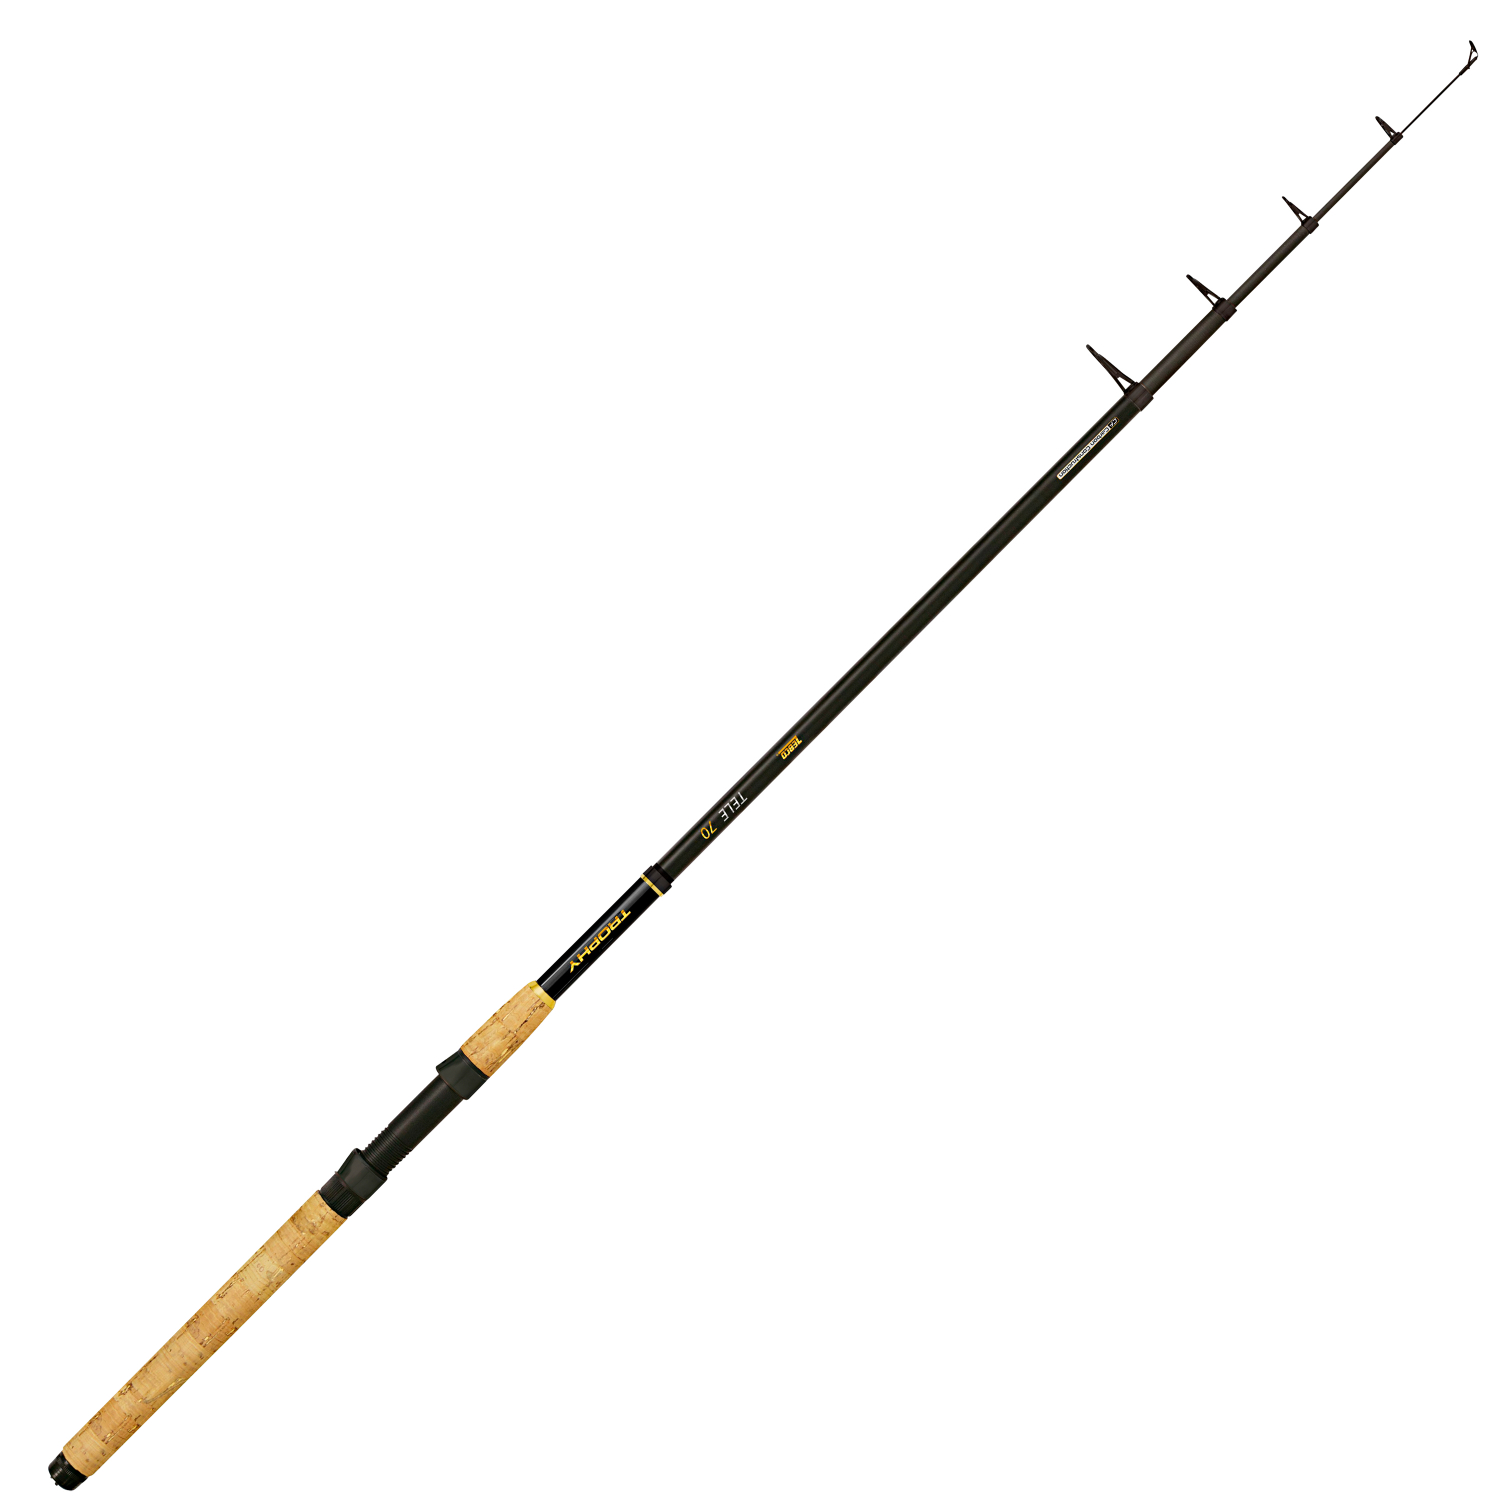 Zebco Fishing Rod Trophy Tele (20-70 g) at low prices